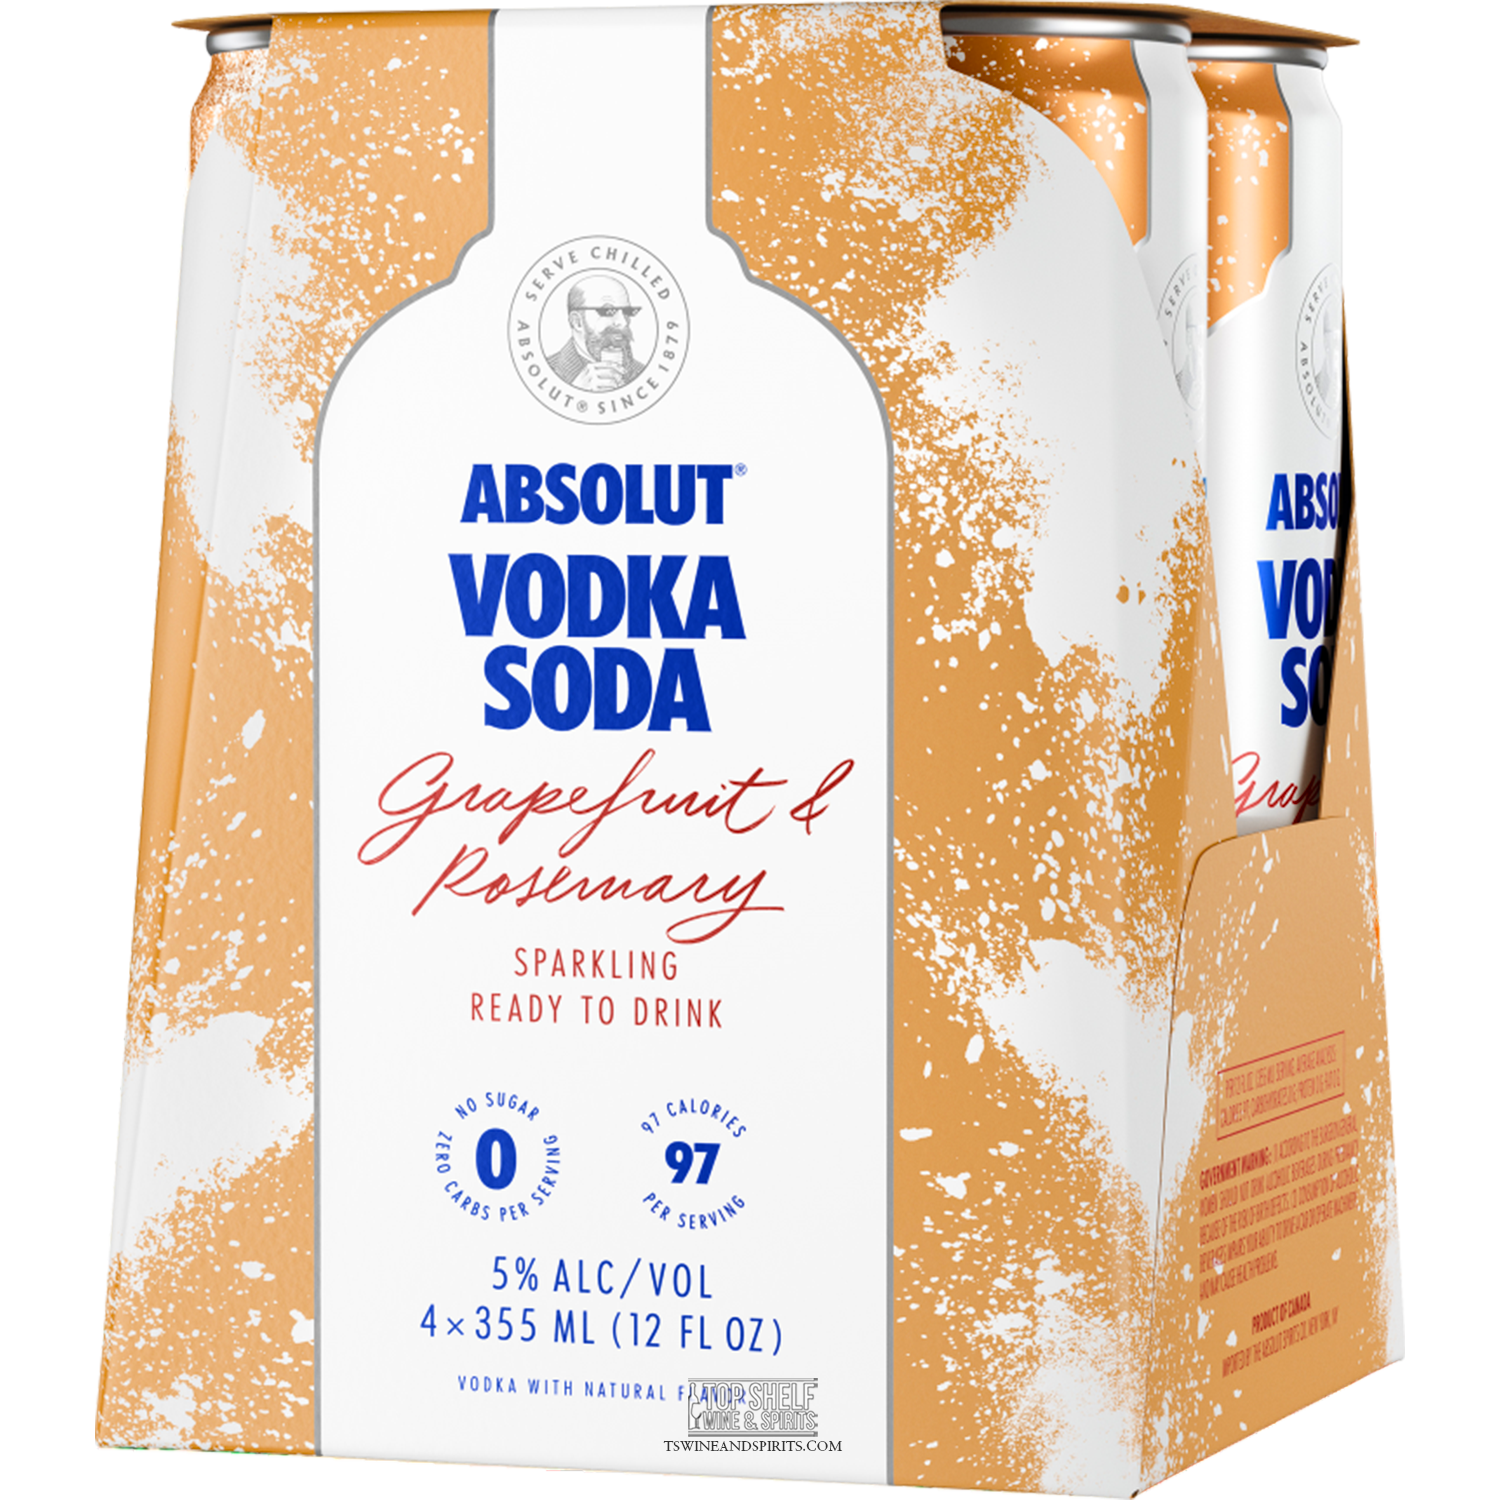 Absolut Grapefruit & Rosemary Vodka Soda (4 Pack Cans)